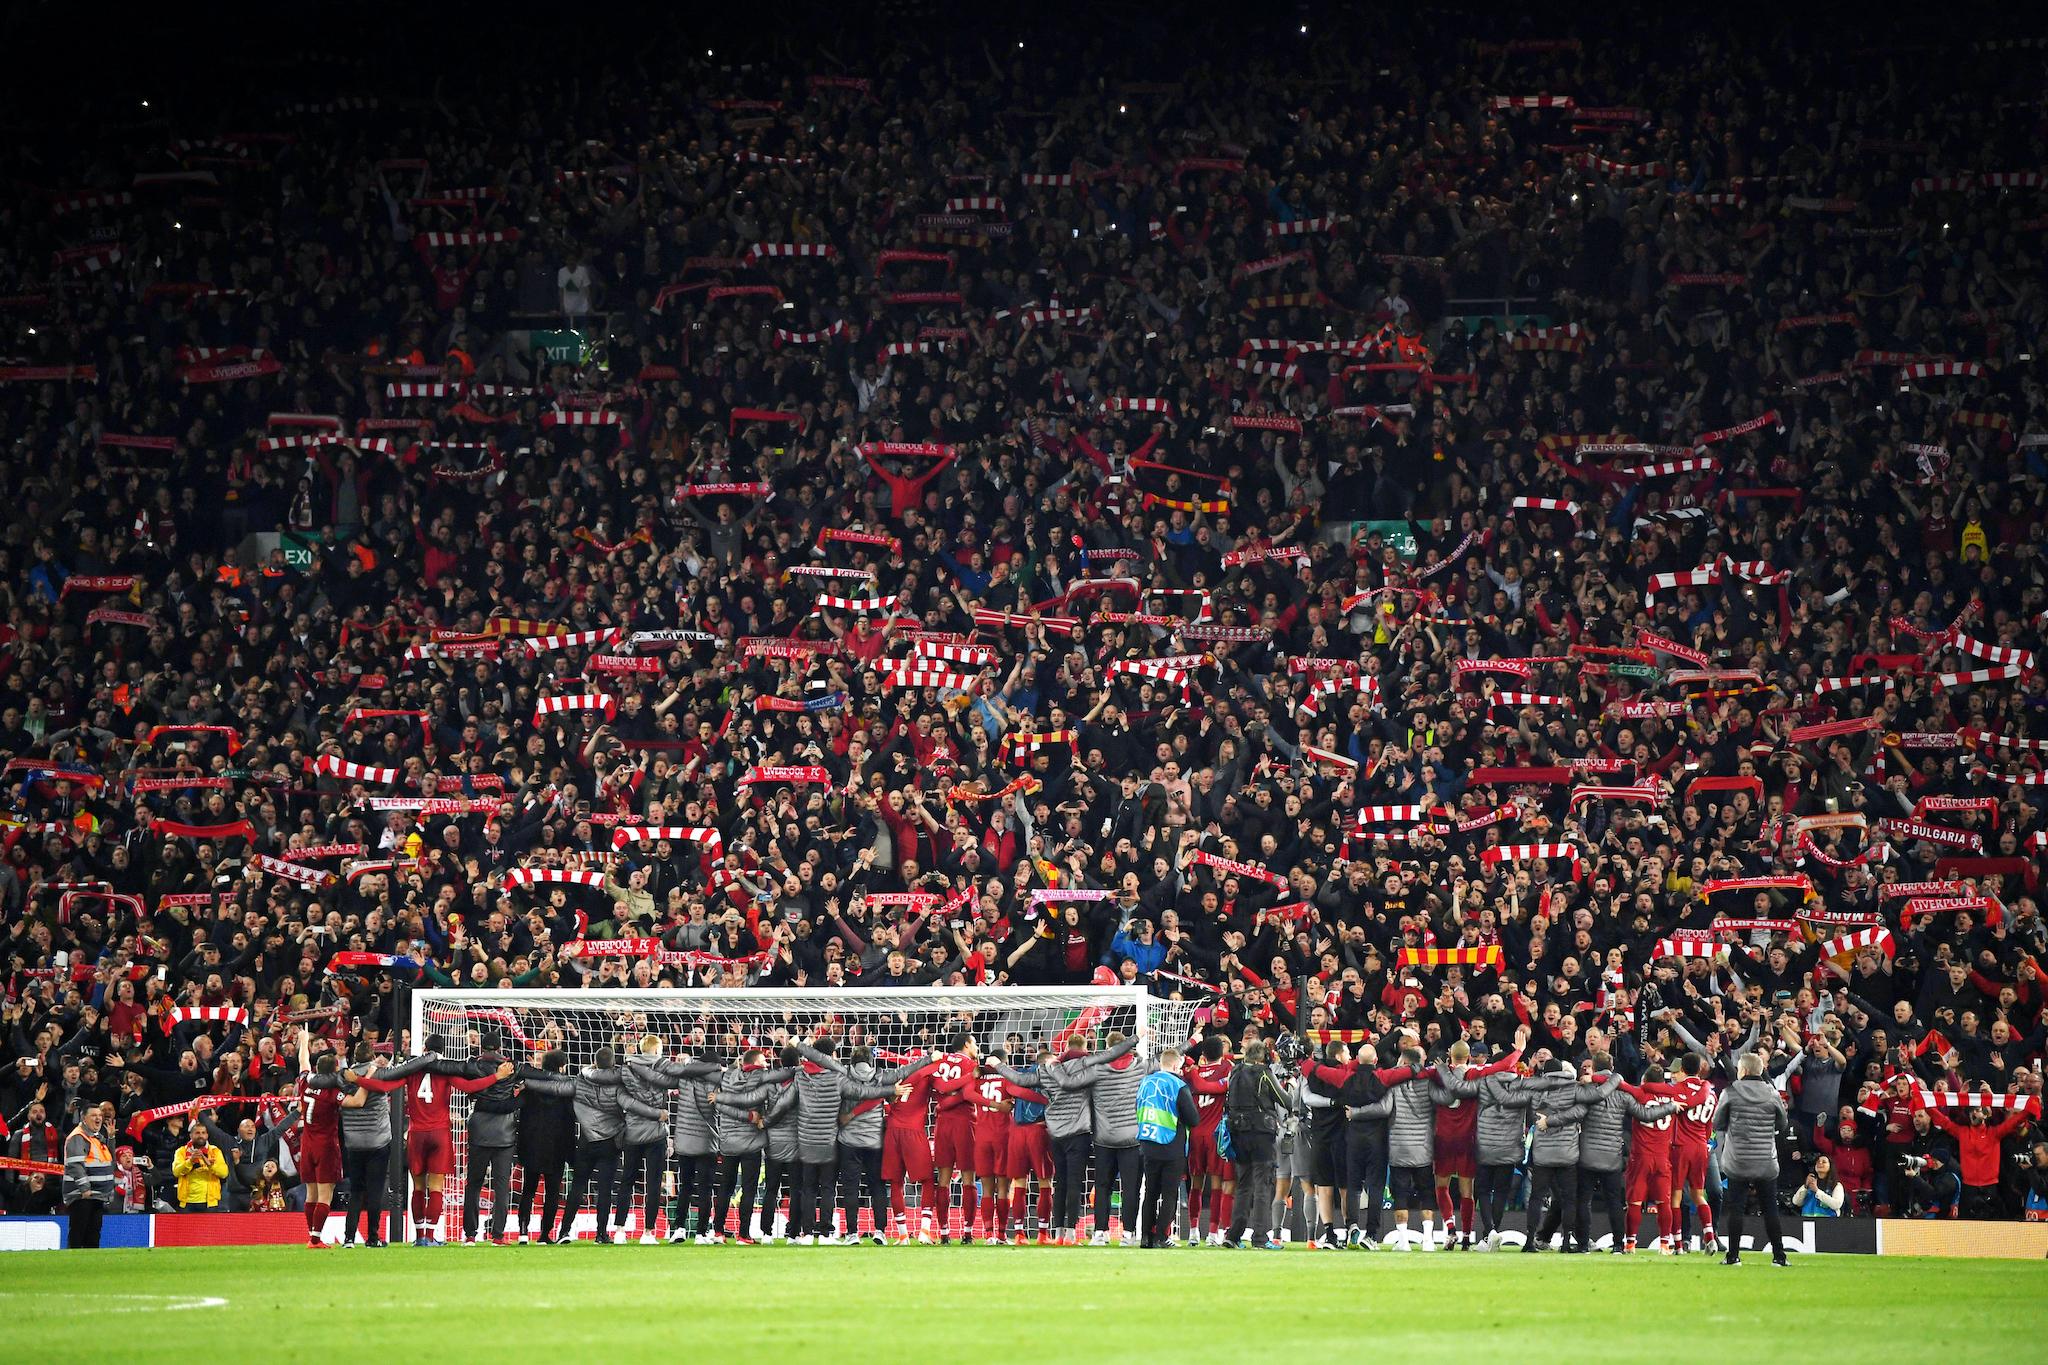 Liverpool players celebrate with fans after the UEFA Champions League Semi Final second leg match between Liverpool and Barcelona at Anfield